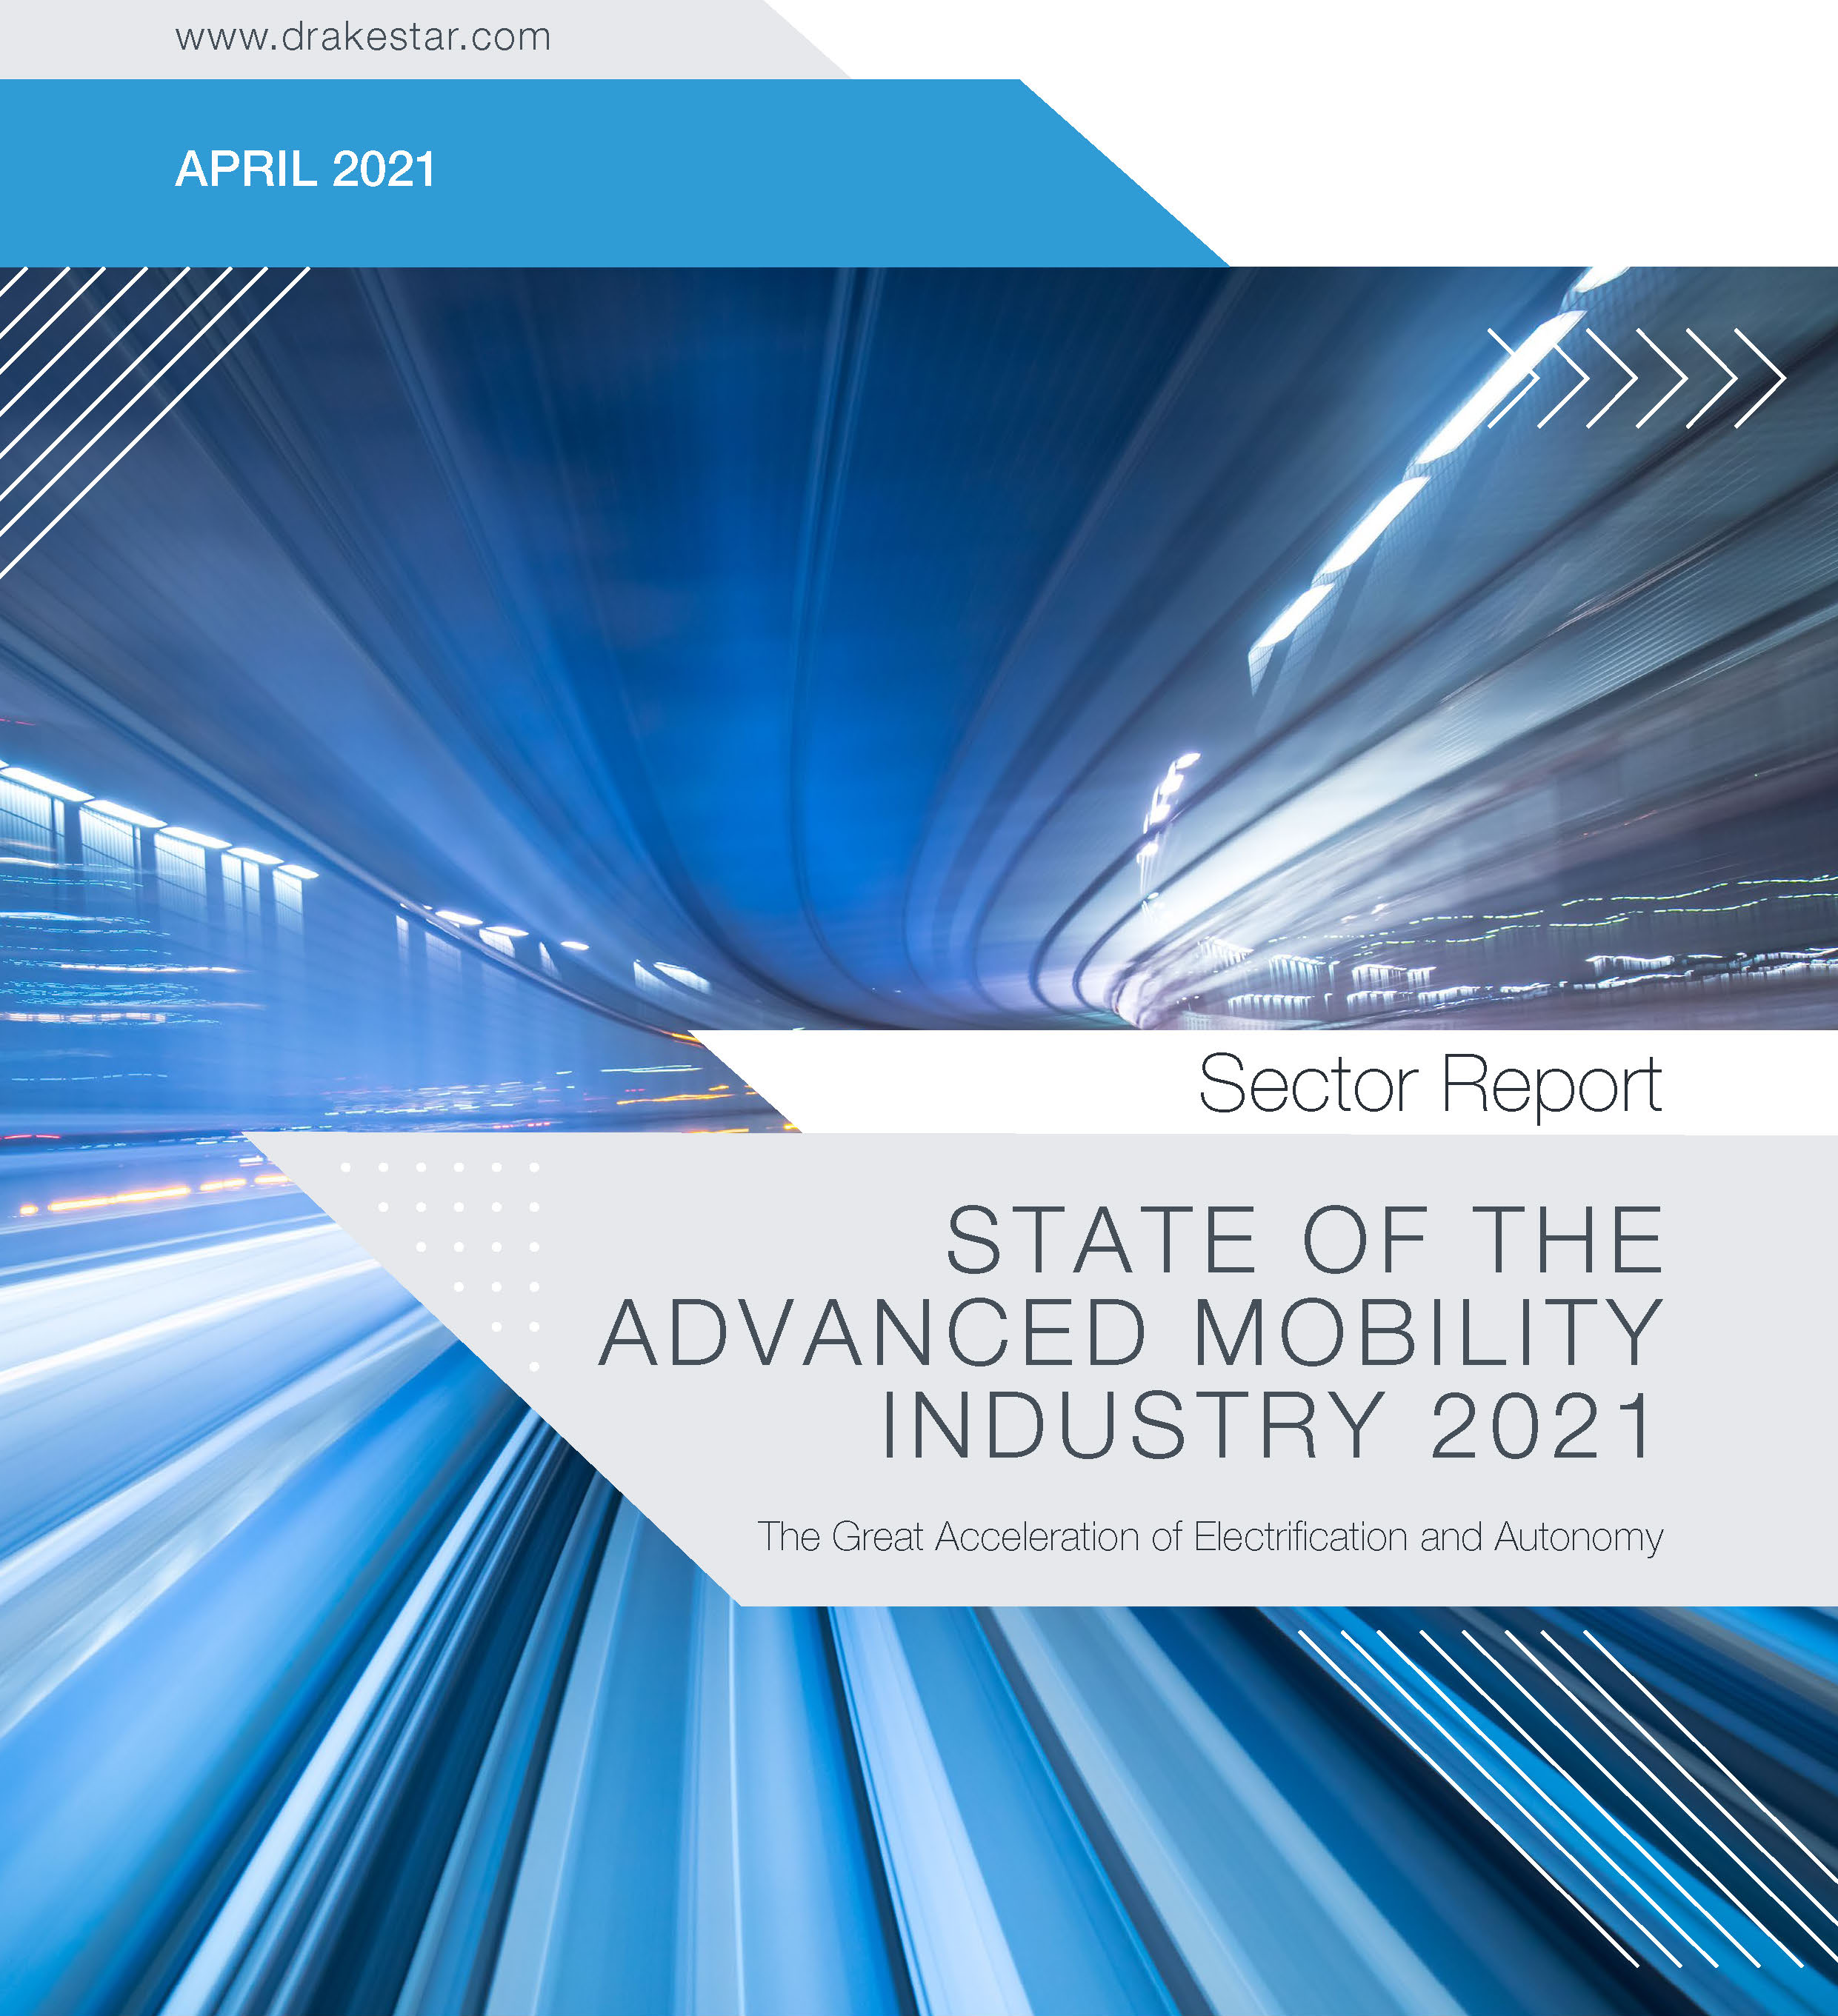 2021 STATE OF THE ADVANCED MOBILITY INDUSTRY REPORT